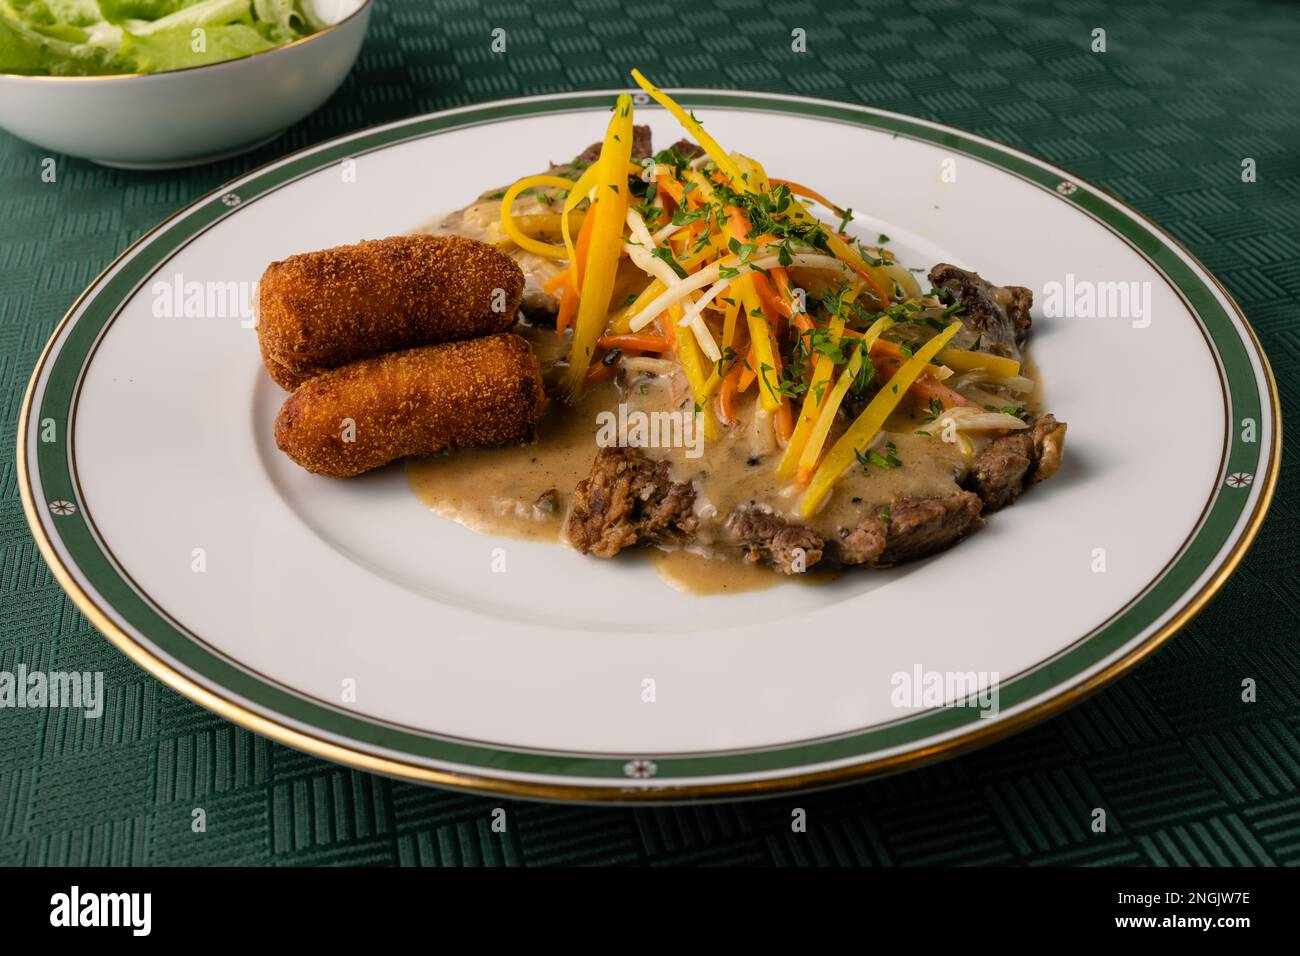 Esterhazy Roast Beef or Rostbraten with Root Vegetable Julienne, Croquettes and Sour Cream Gravy Stock Photo